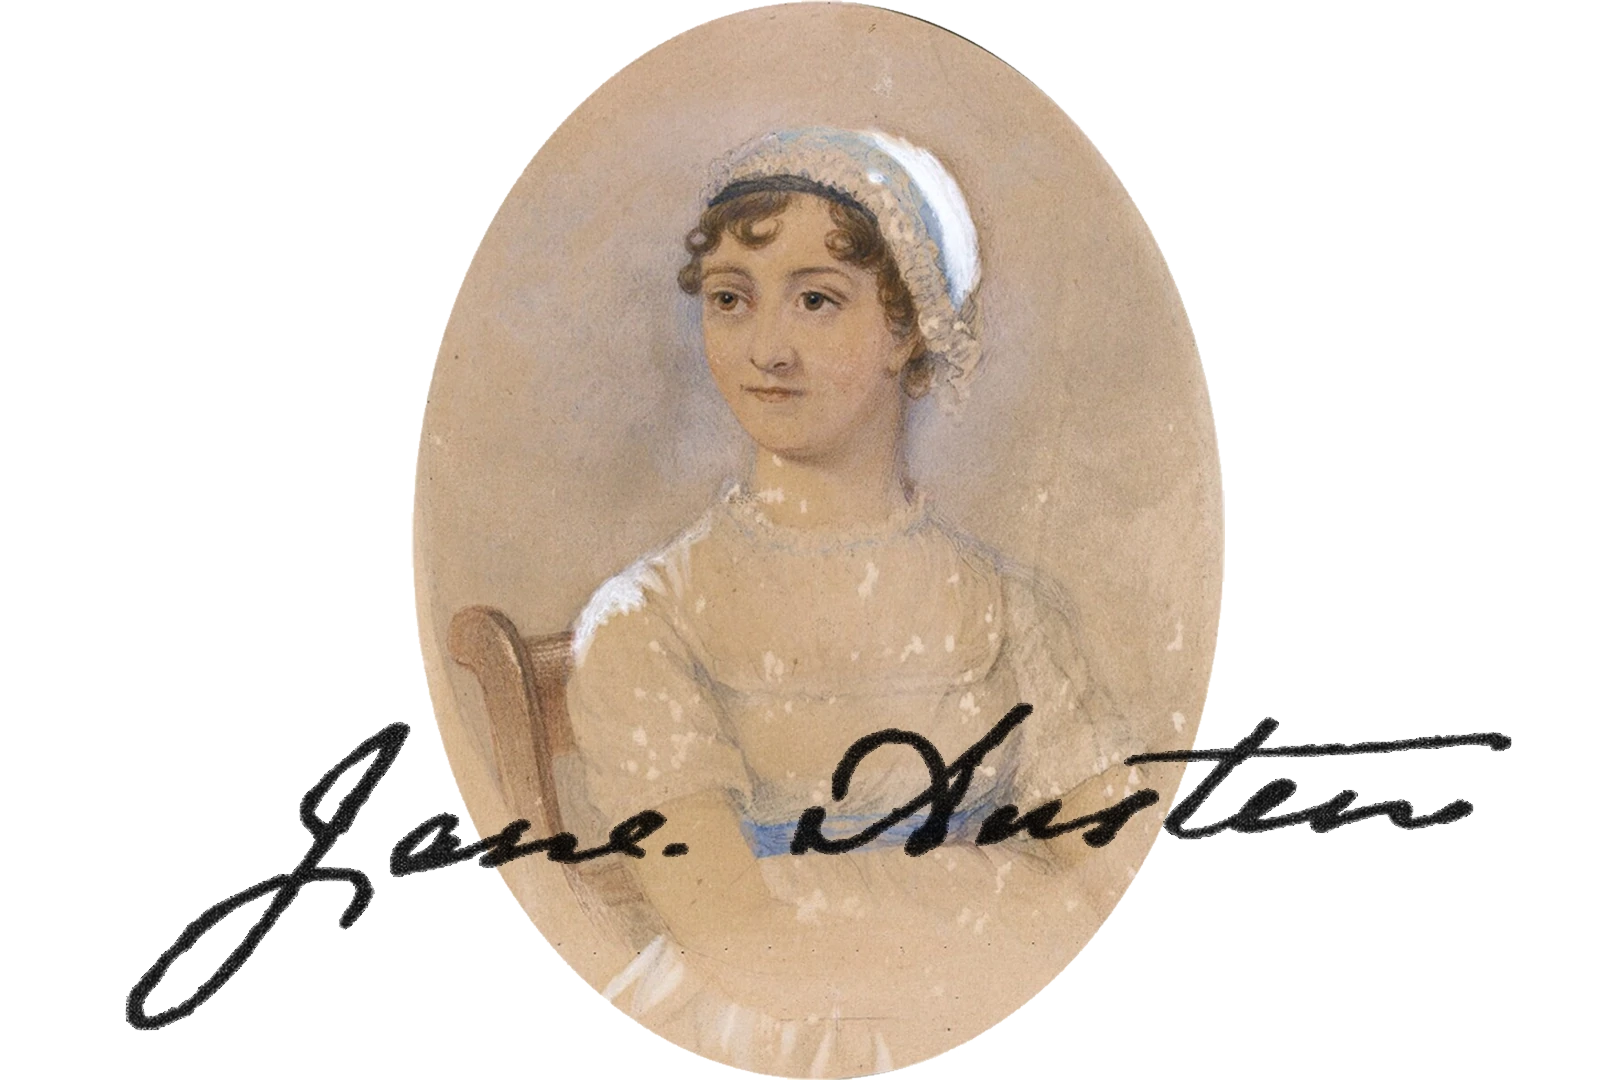 Portrait painting of Jane Austen and her name in her handwriting written over the top.